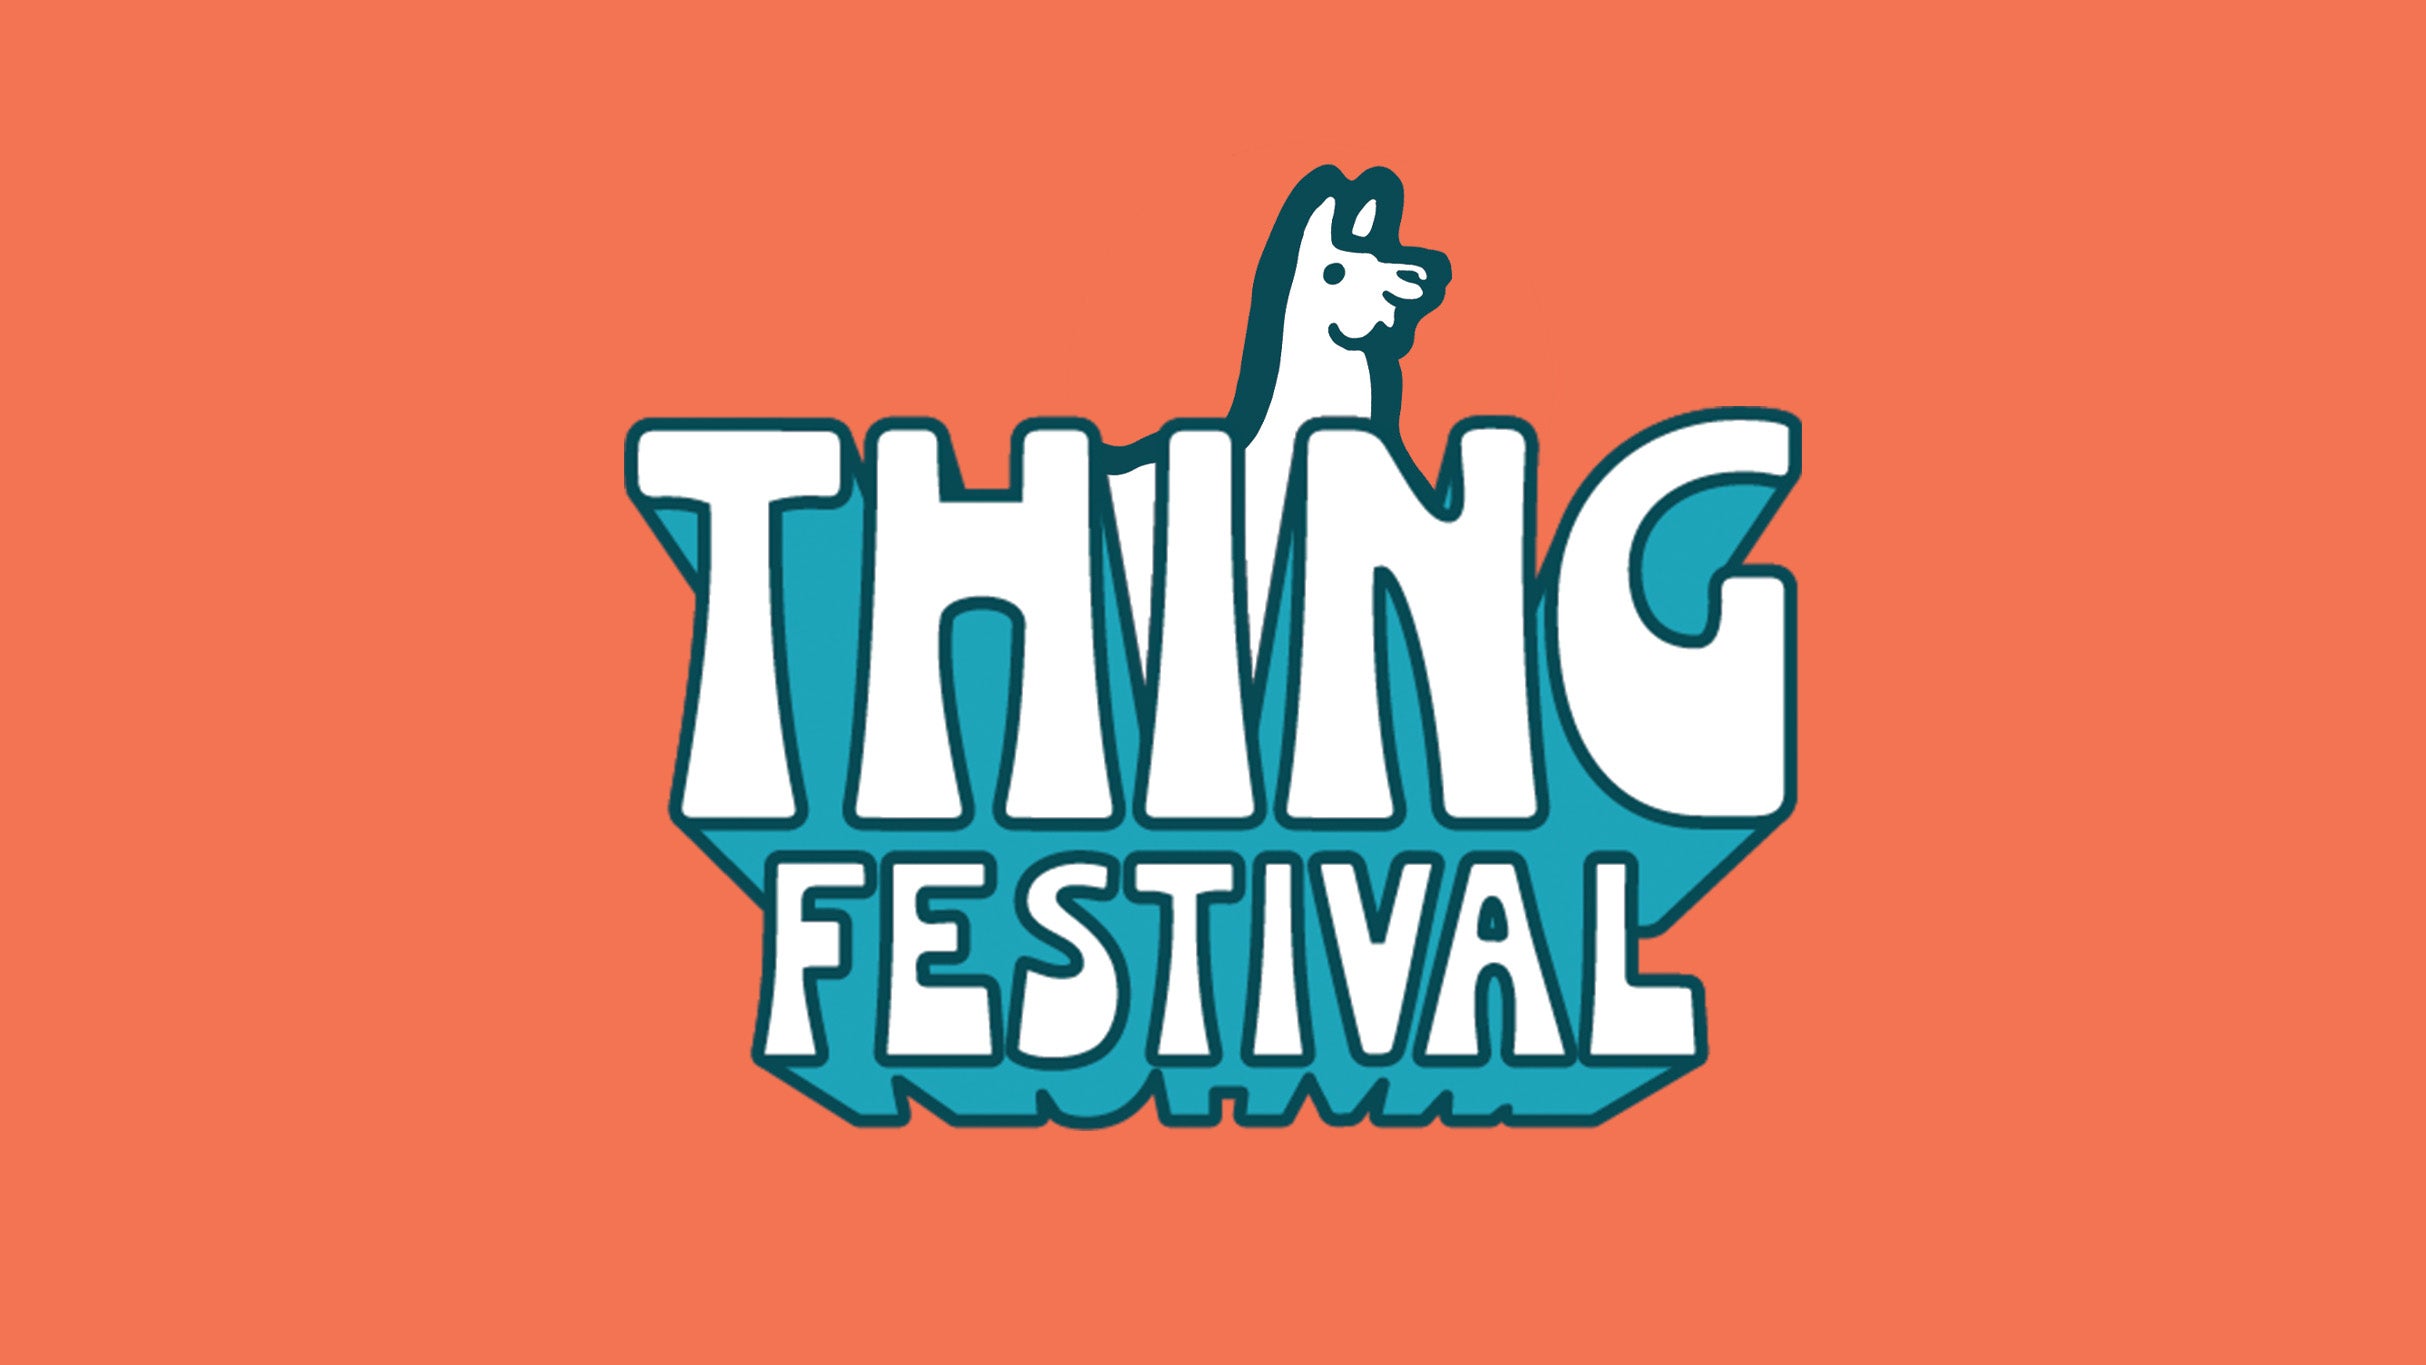 members only presale code to THING Festival presale tickets in Carnation at Remlinger Farms